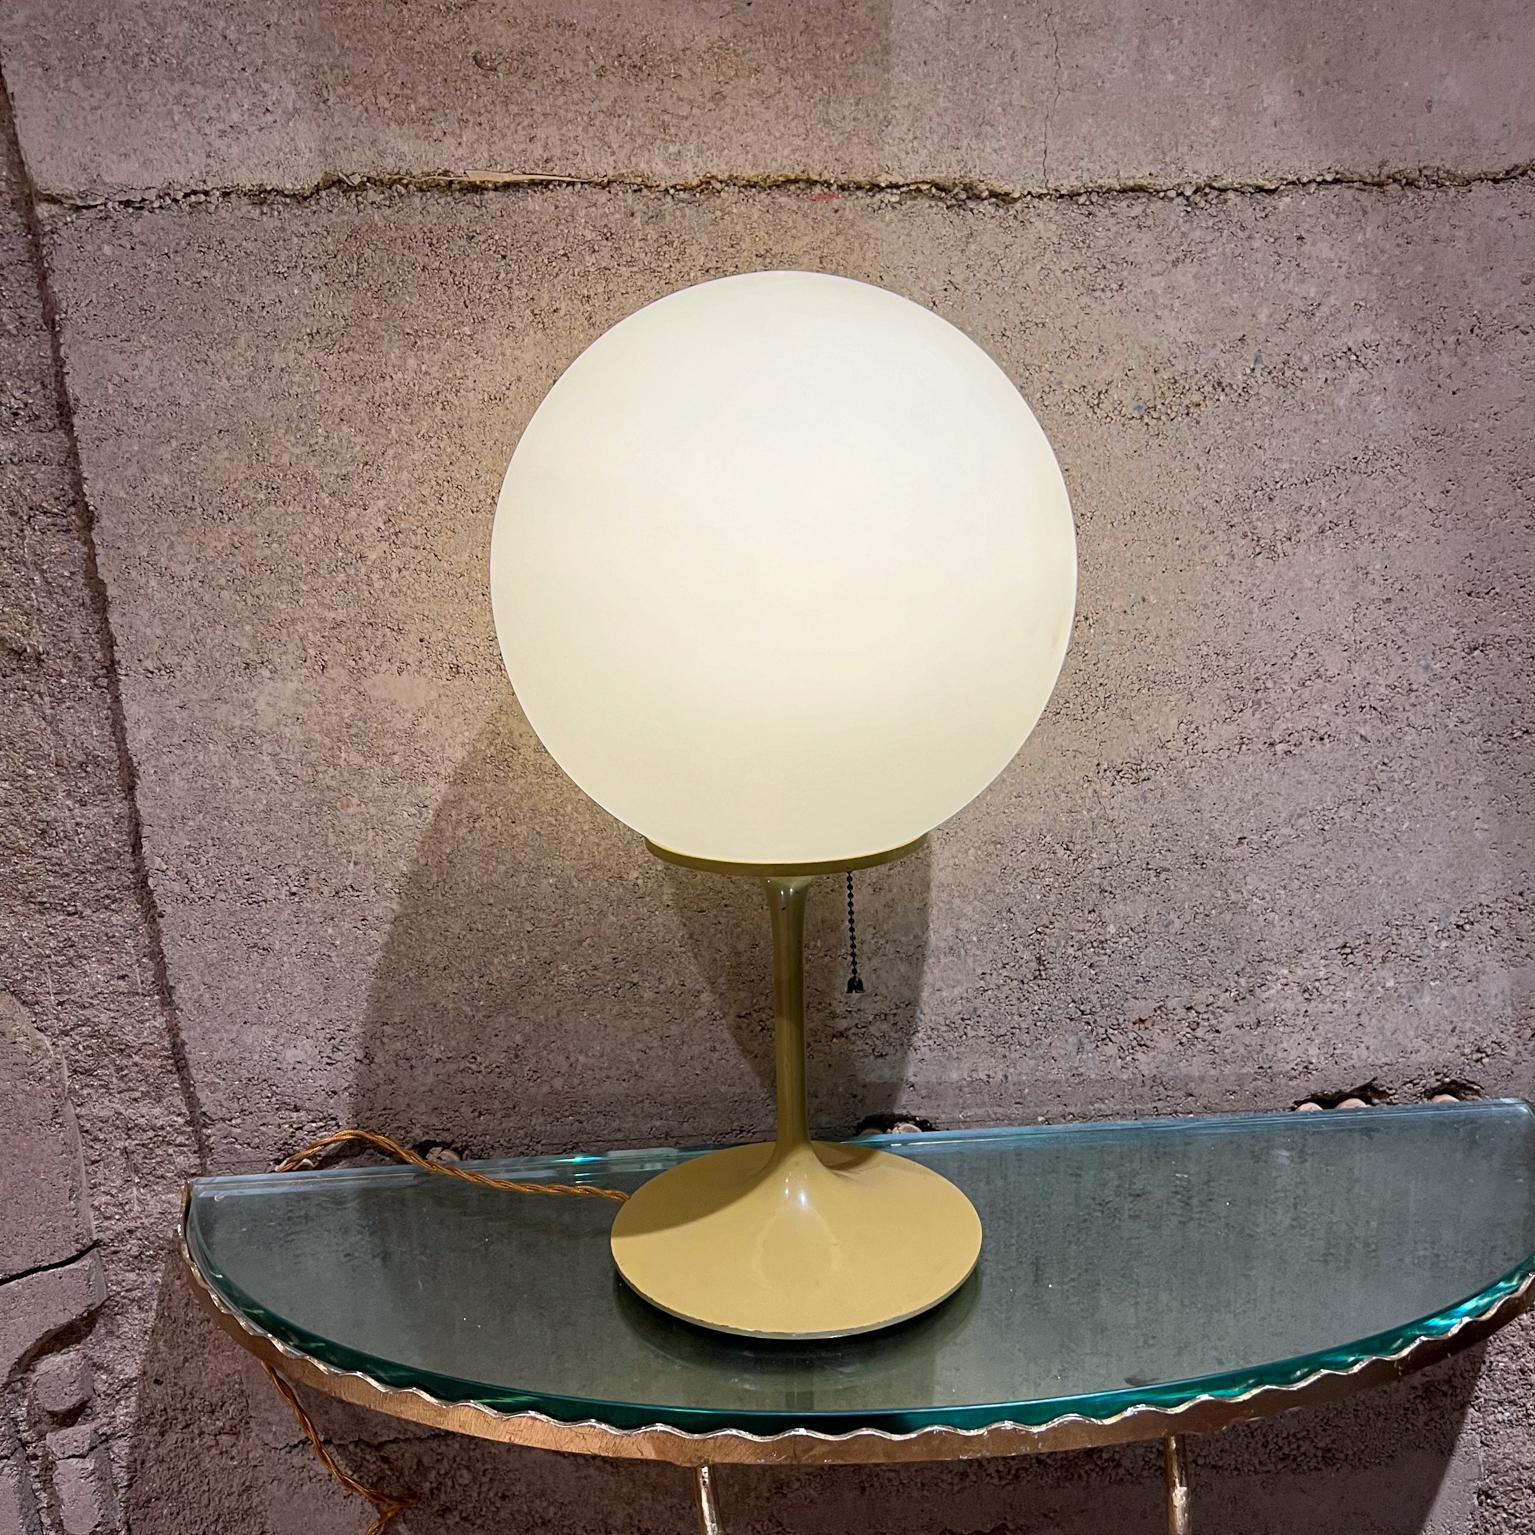 Innovative and attractive design by Bill Curry Stemlite Table Lamp 1962 Iconic Design Line Los Angeles, California
Award winning Lamp was recognized for design excellence by the Pasadena Art Museum.
Named most influential lamp of the year by